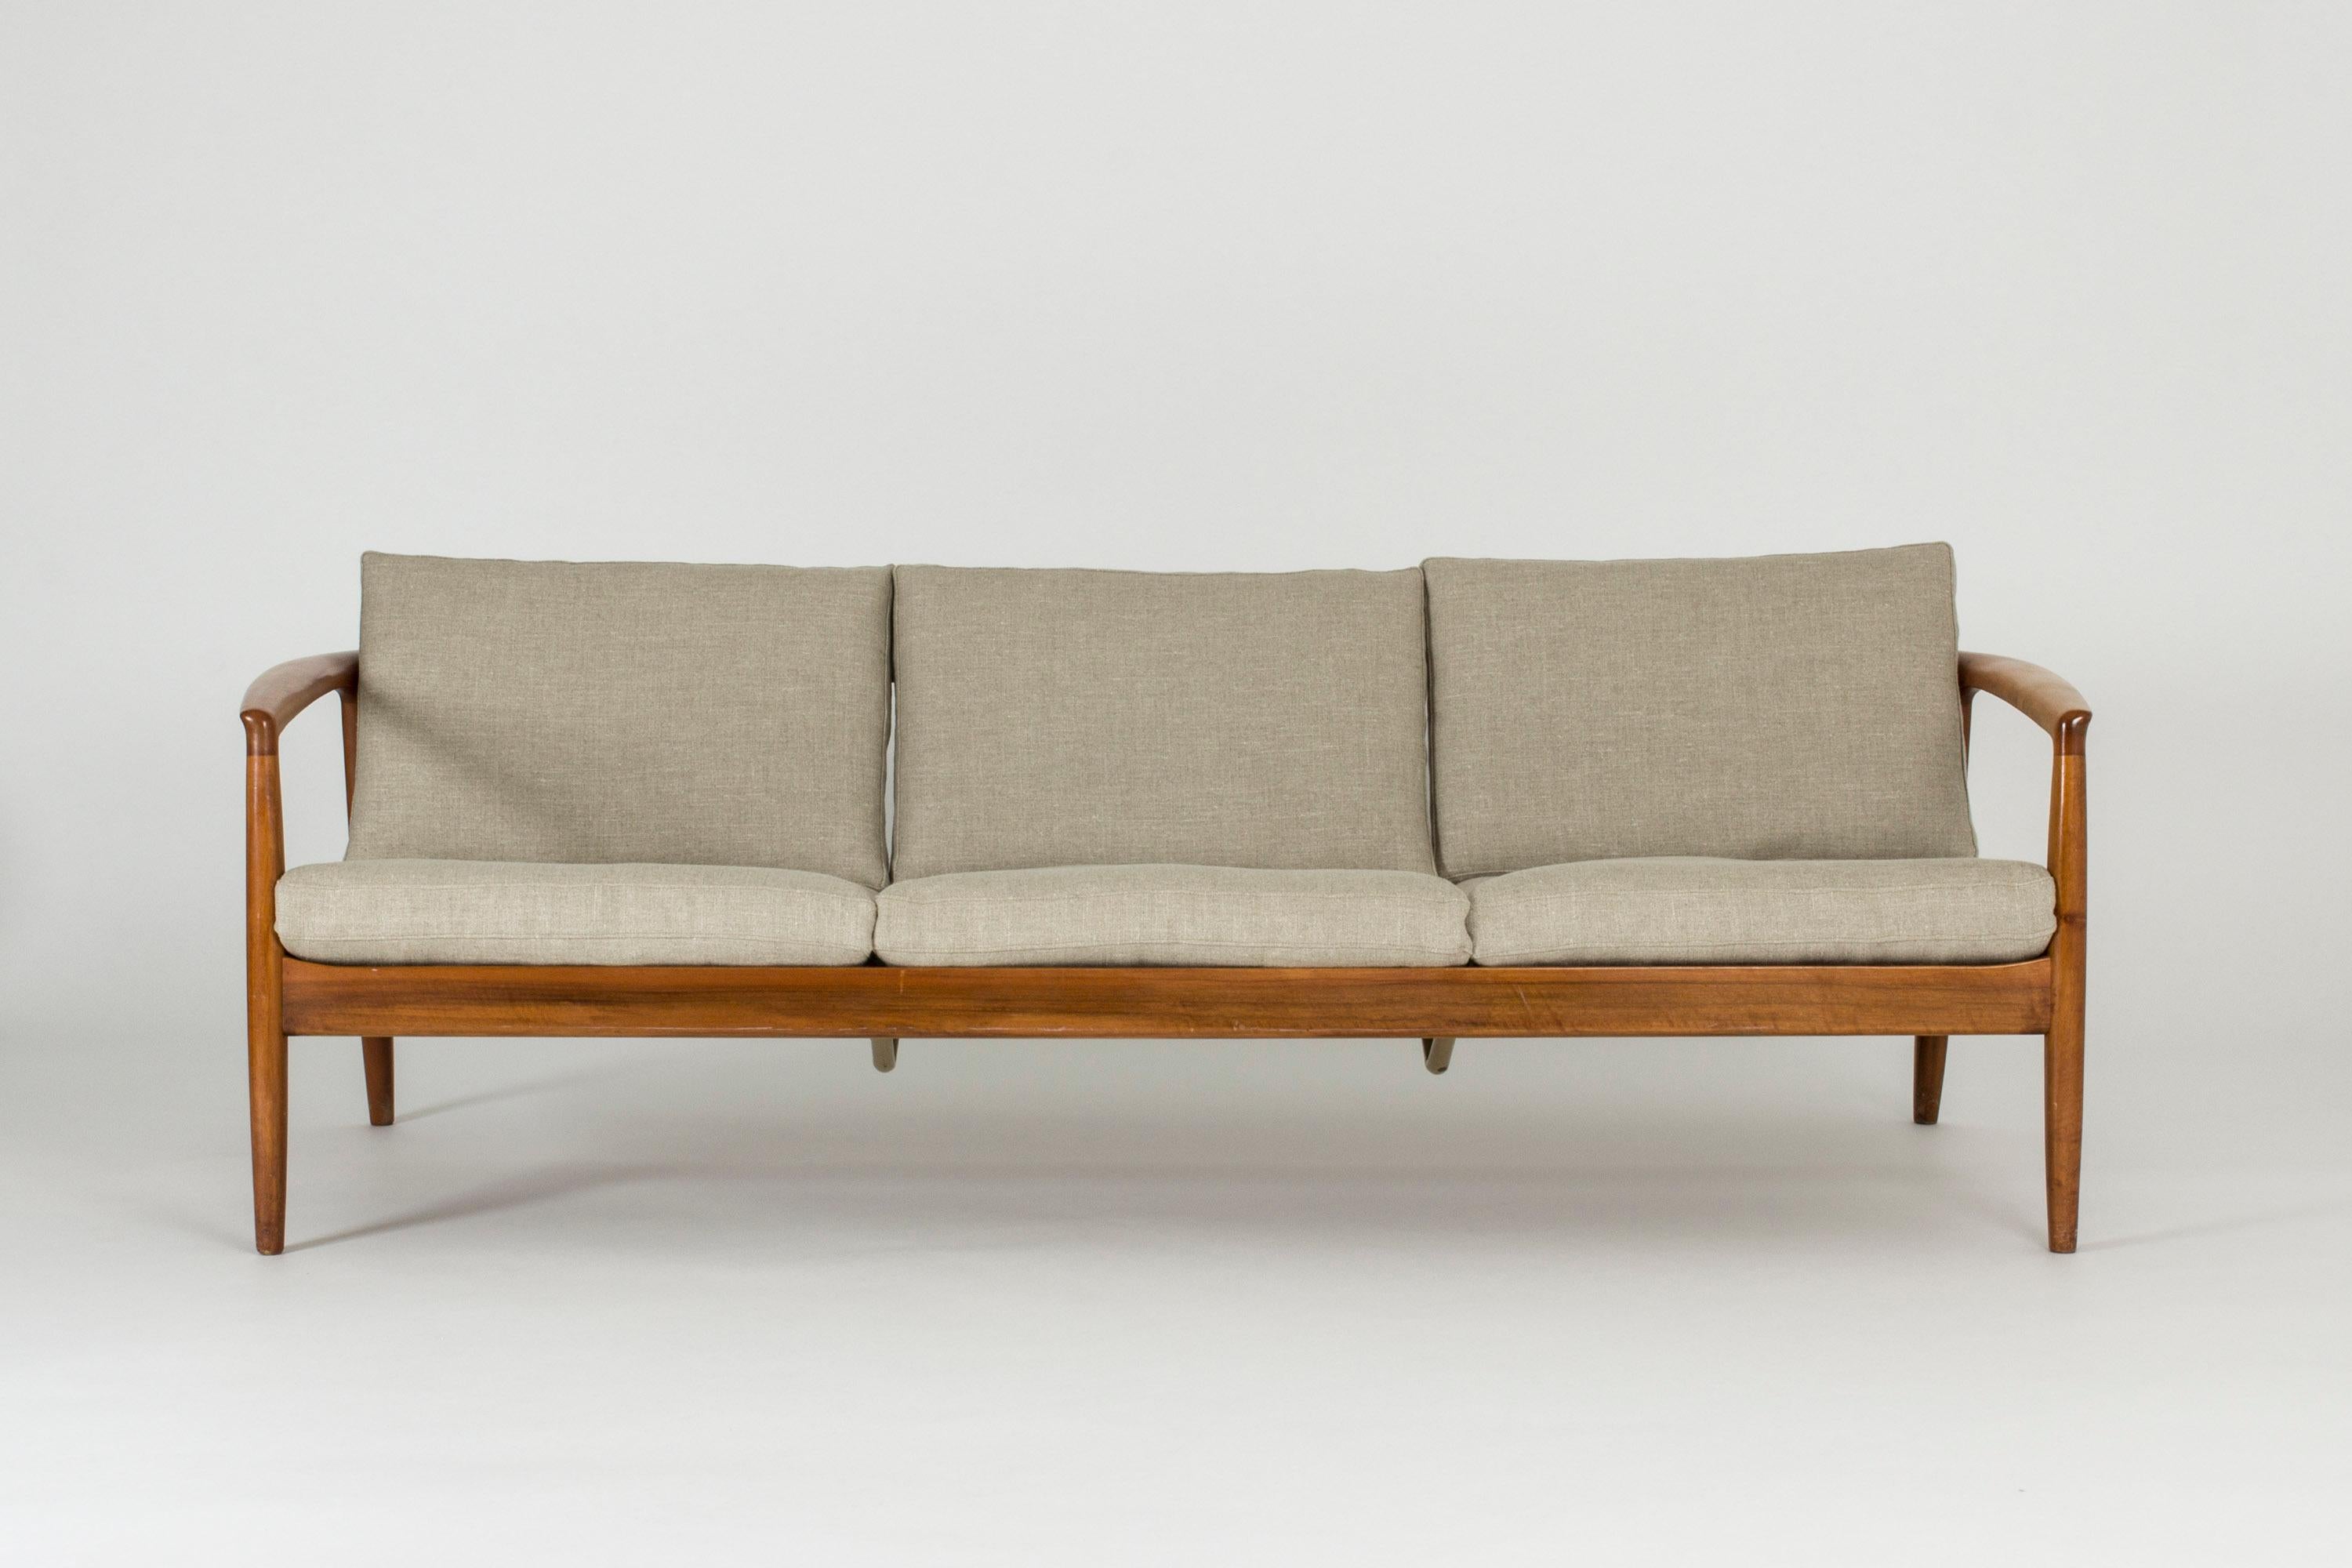 Cool and comfy sofa by Folke Ohlsson in luxurious walnut. Beautiful ribbed back and curved armrests that. Reupholstered with a sand colored linen fabric.